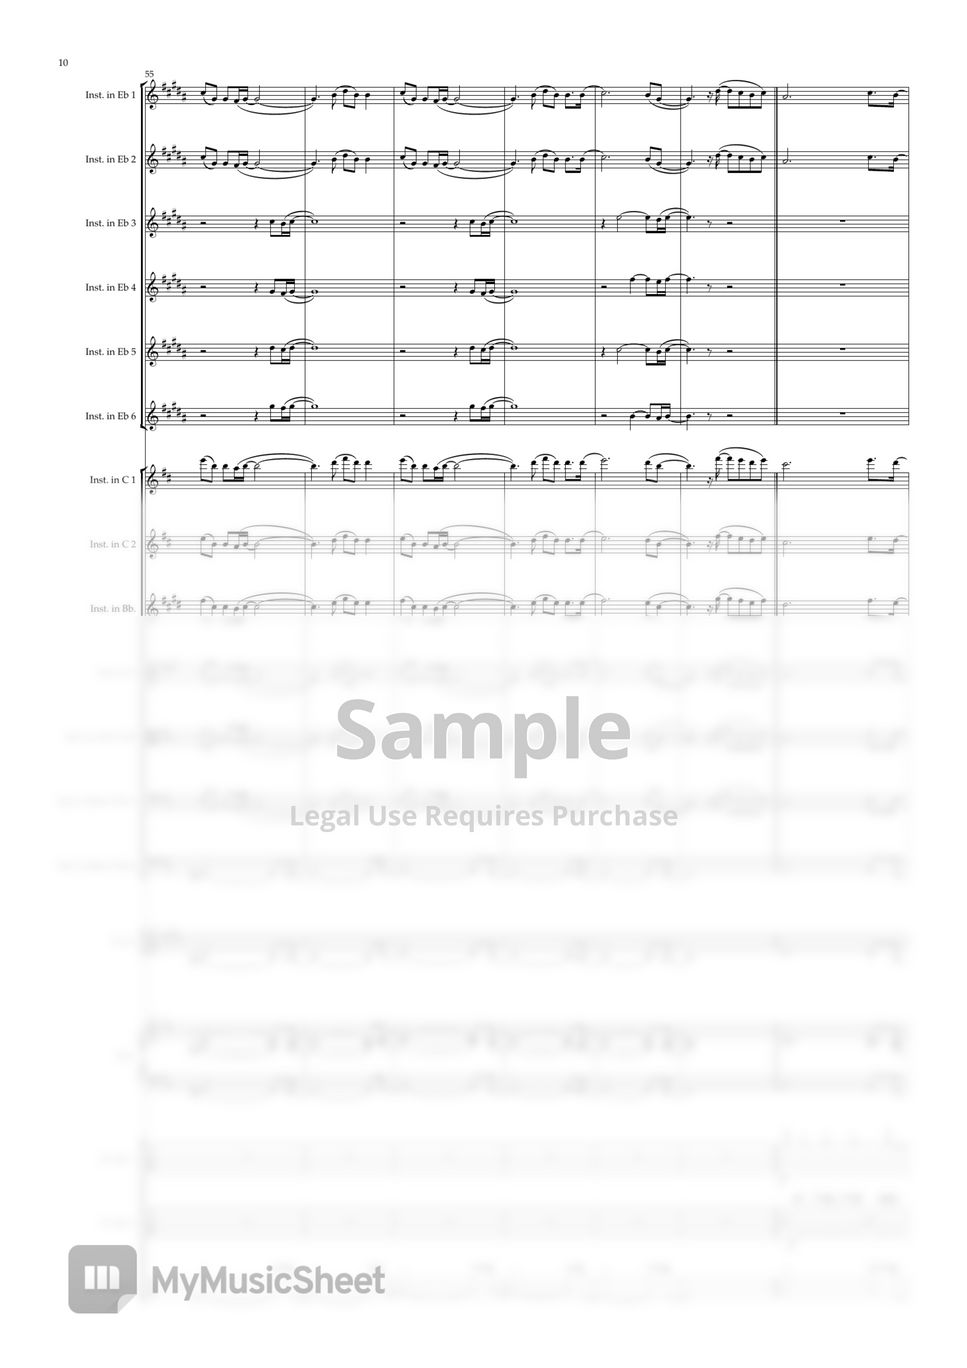 Sacrifice – The Weeknd (Instrumental Cover) Sheet music for Piano, Bass  guitar, Drum group, Tom tom (Mixed Ensemble)